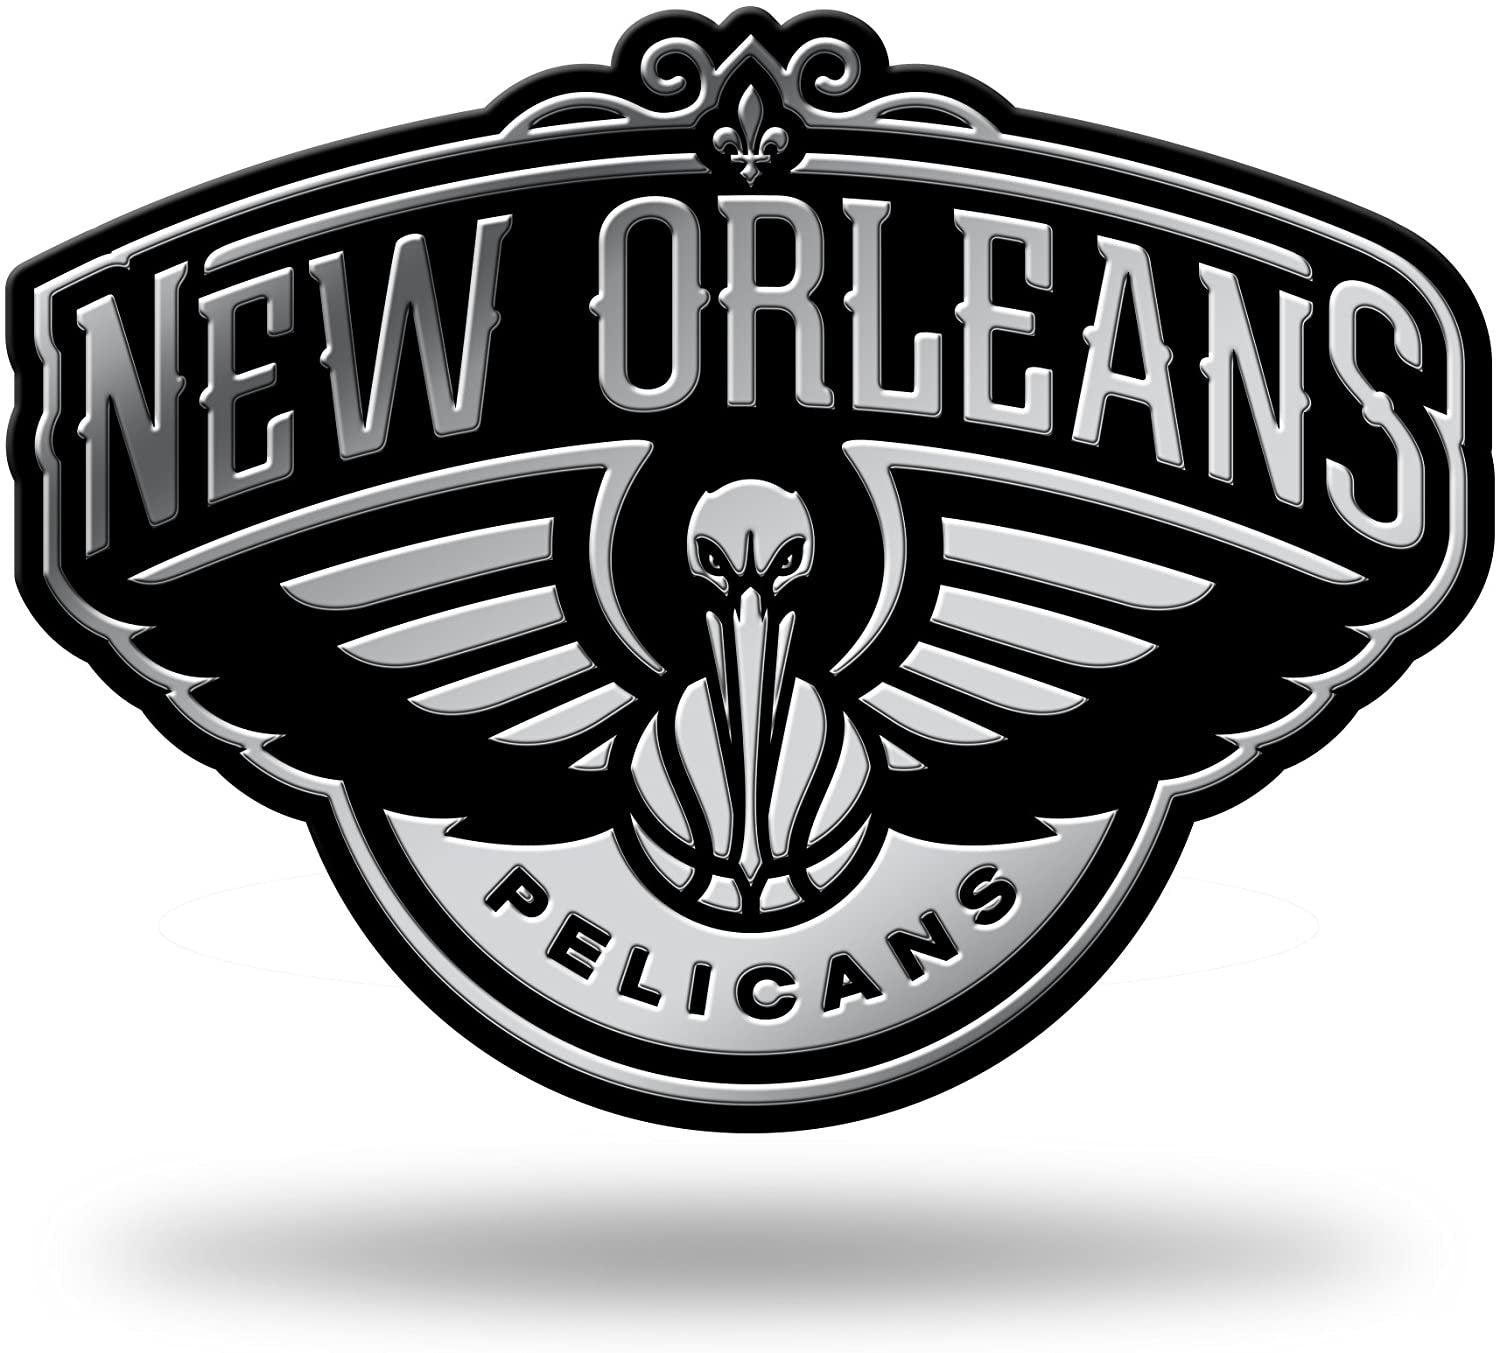 New Orleans Pelicans Silver Chrome Color Auto Emblem, Raised Molded Plastic, 3.5 Inch, Adhesive Tape Backing